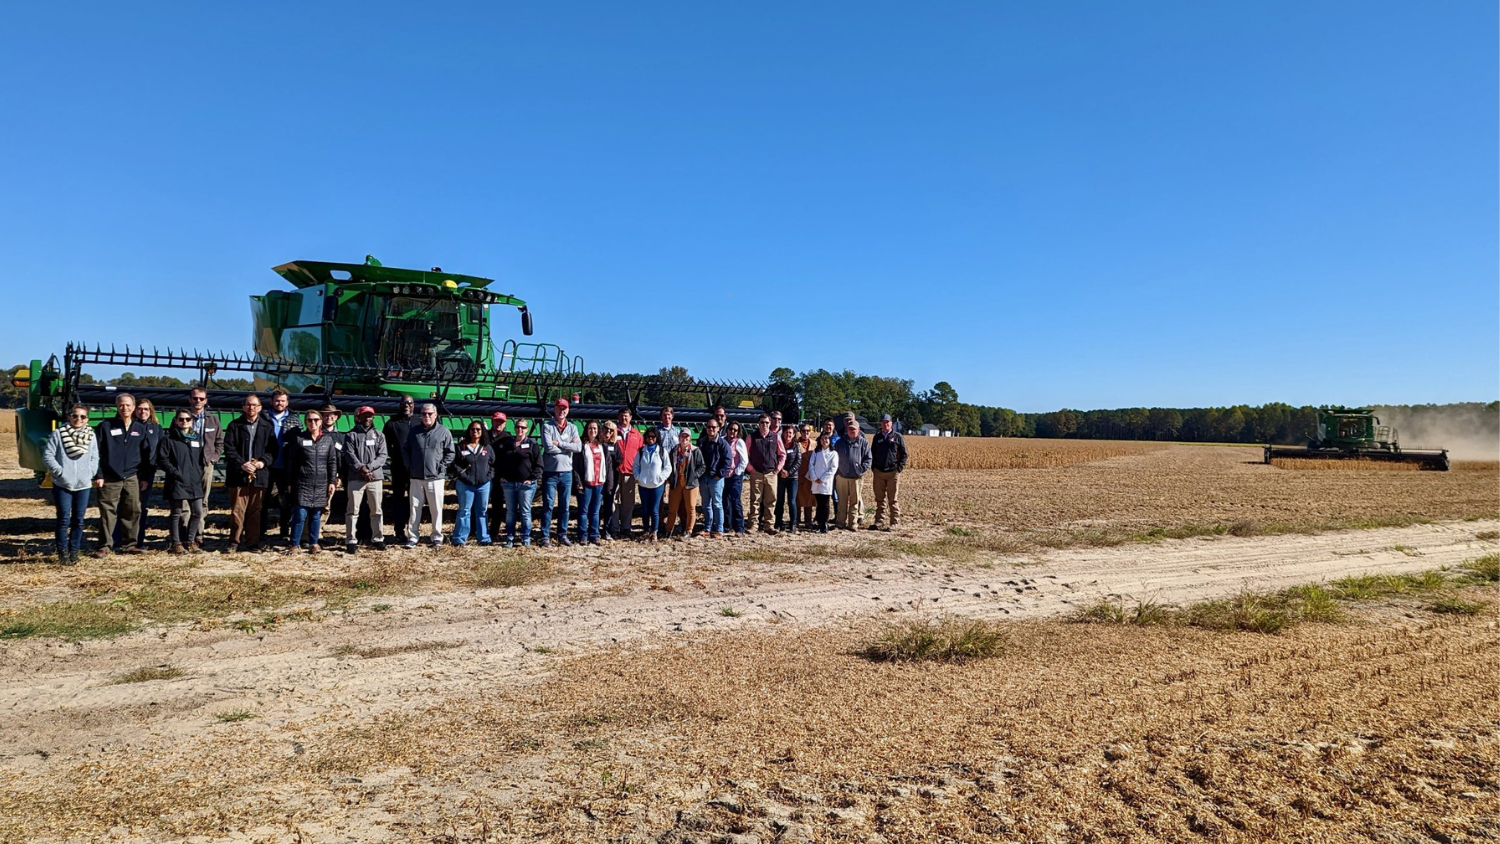 N.C. PSI faculty in a field in front of a large machine